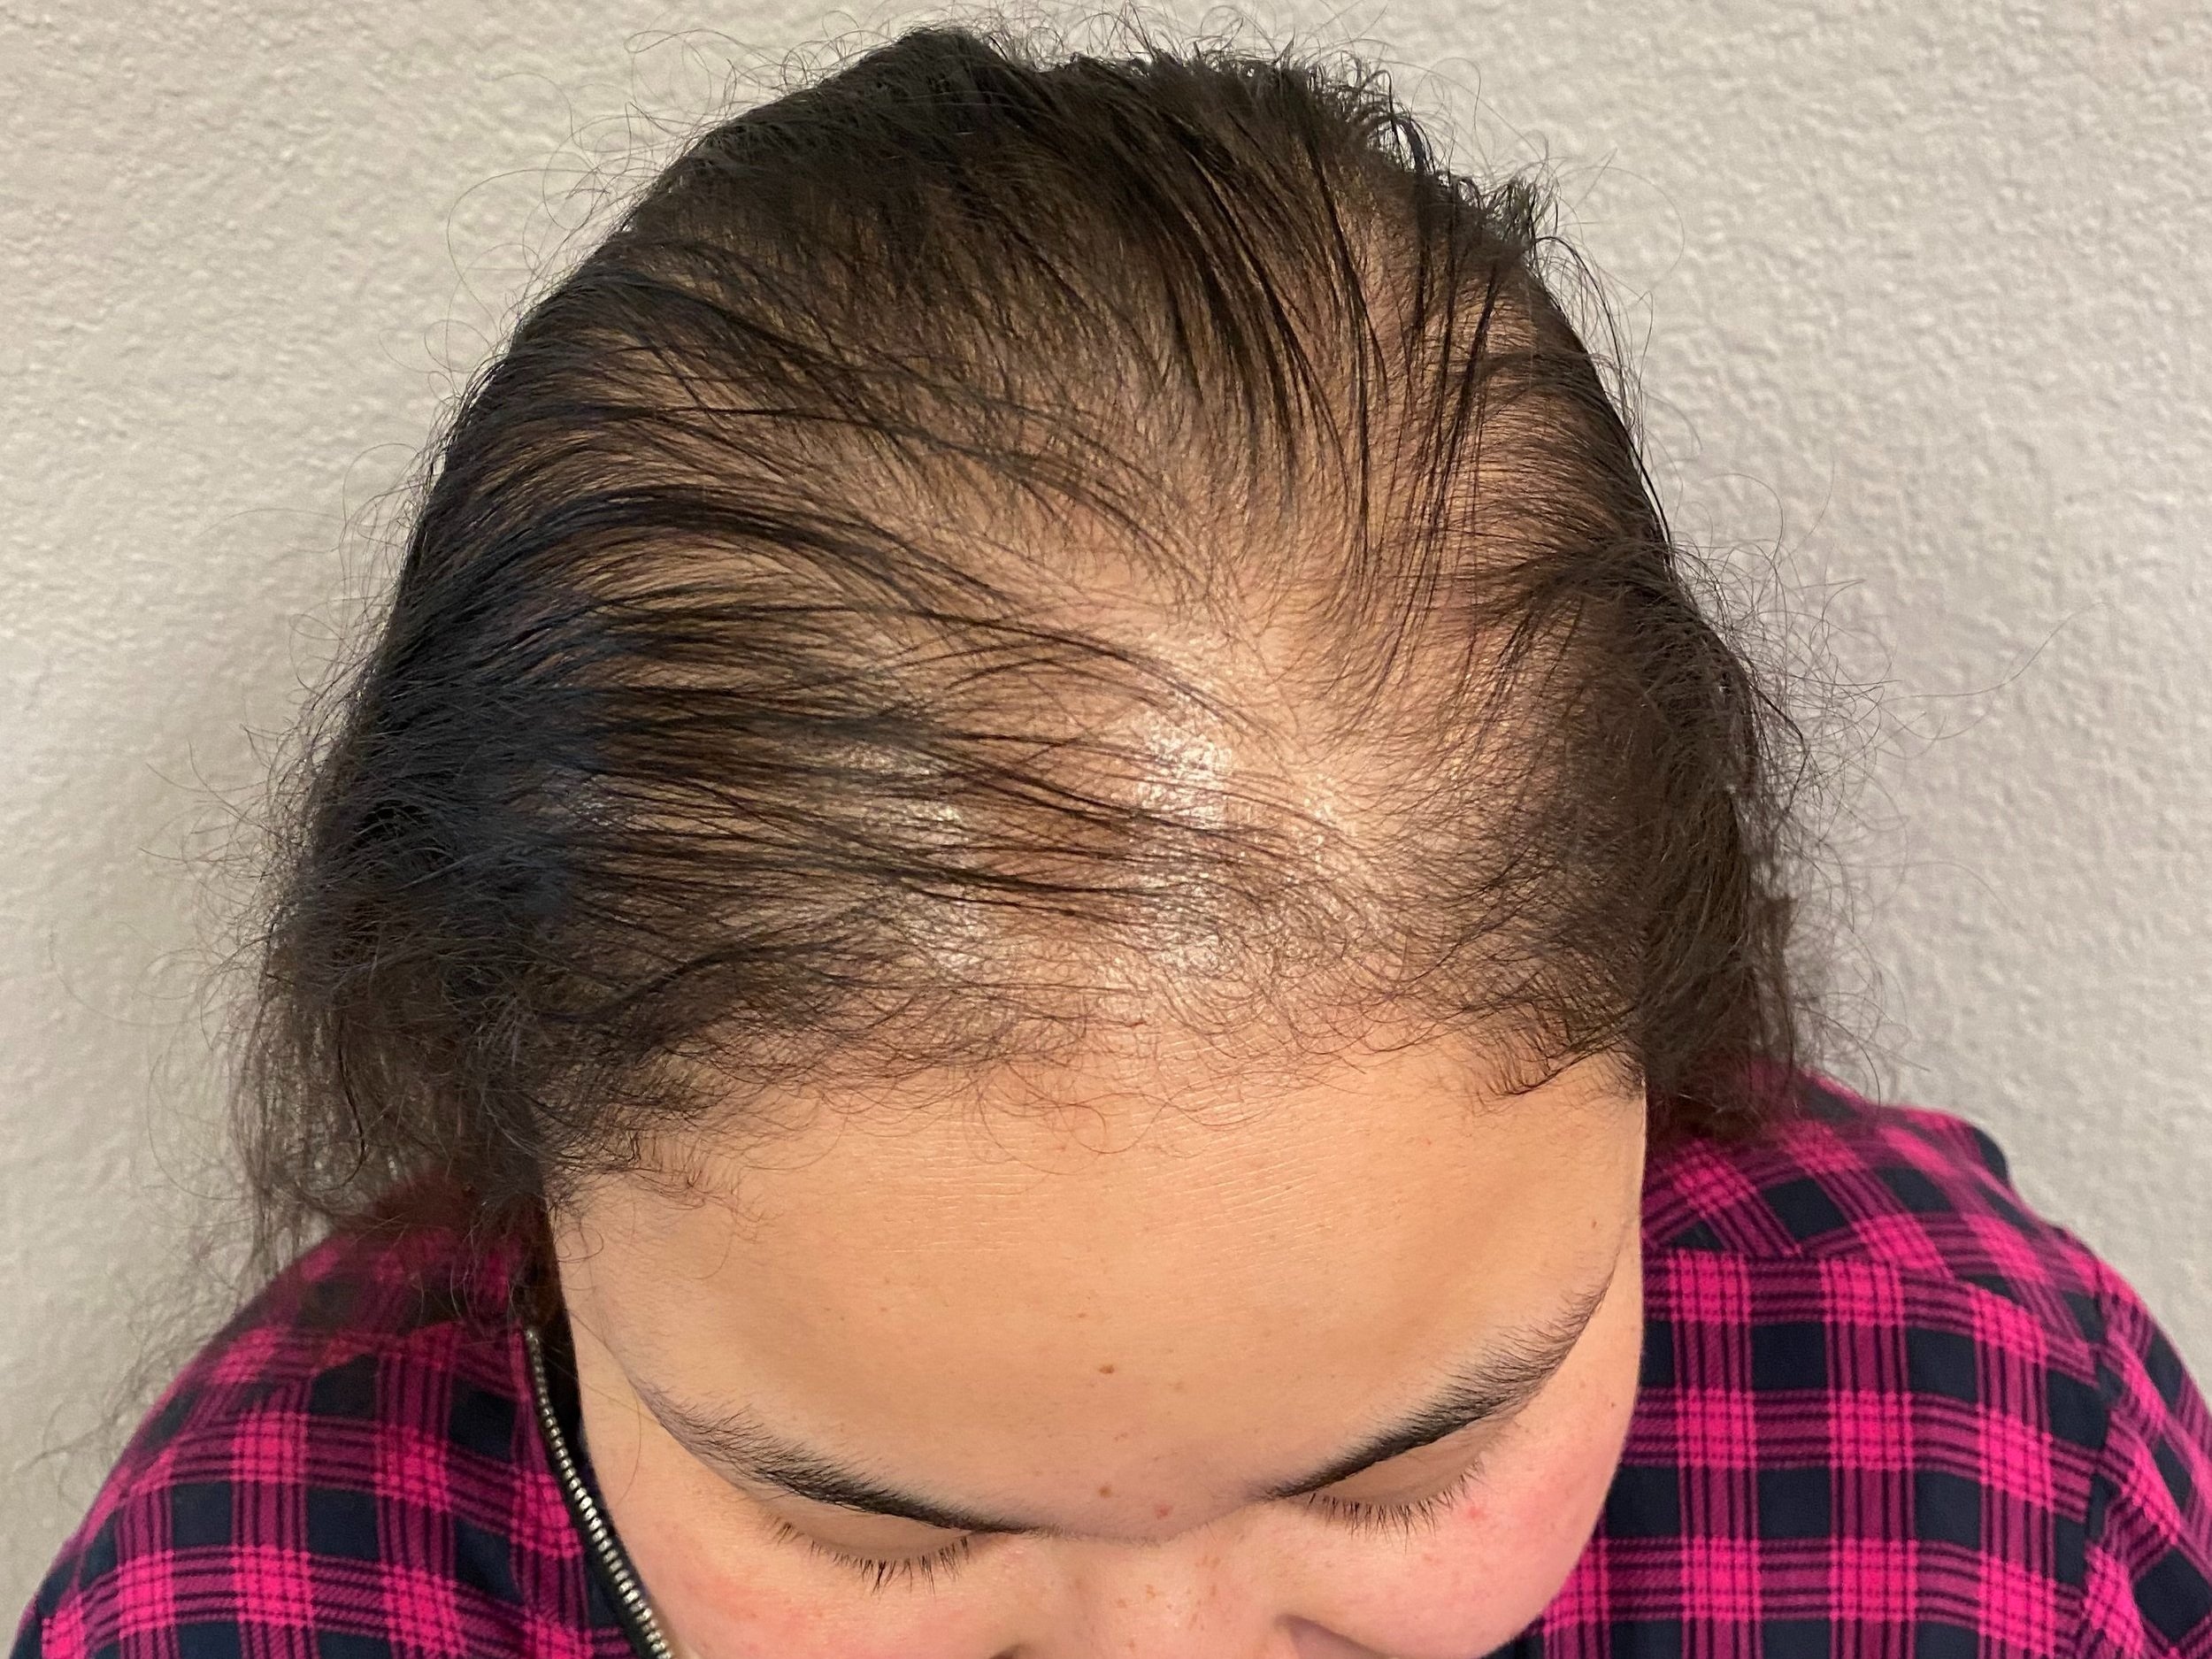 Before Keravive Scalp Treatment with HydraFacial